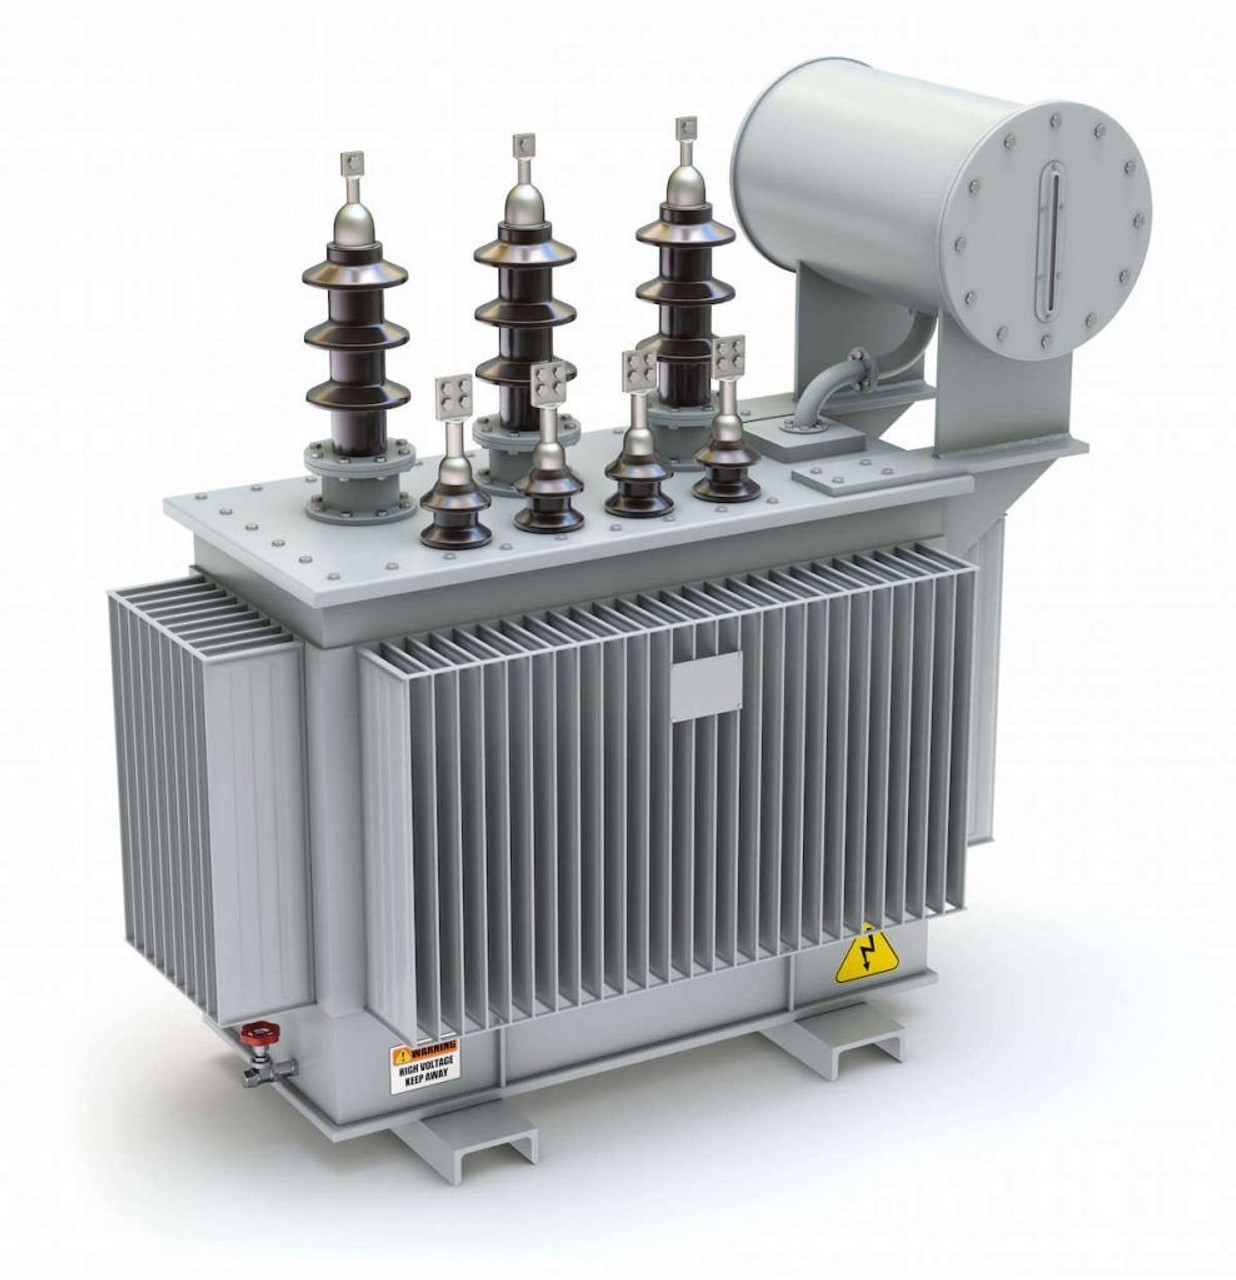 10 Benefits of using a Transformer - GZ Industrial Supplies